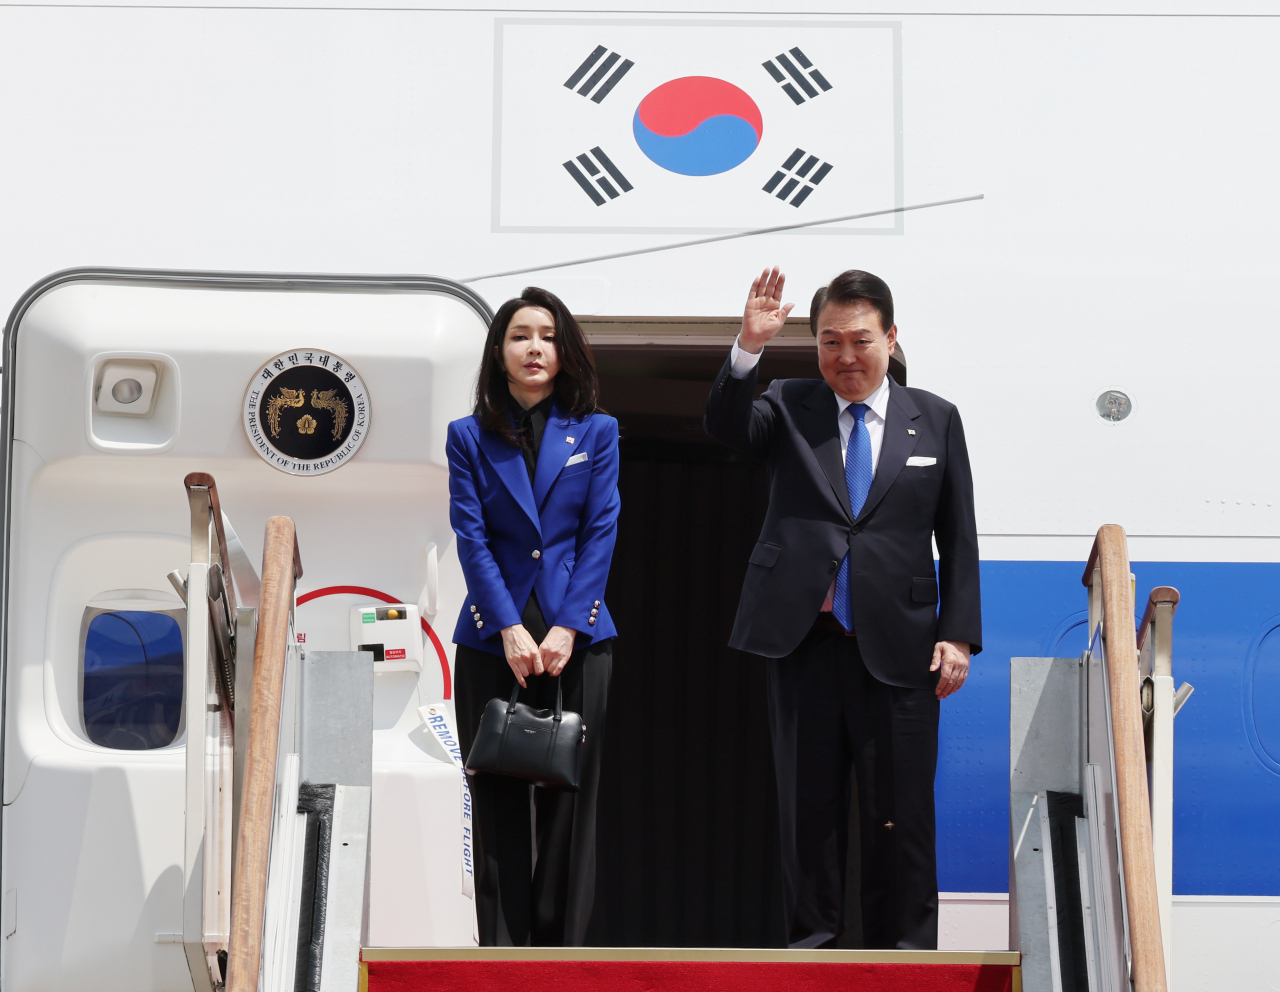 President Yoon Suk Yeol and his wife, Kim Keon Hee, greet officials while boarding the presidential plane at Seoul Airport in Seongnam, Gyeonggi Province, on Friday, prior to departing for Japan to attend the Group of Seven Summit in Hiroshima. (Yonhap)